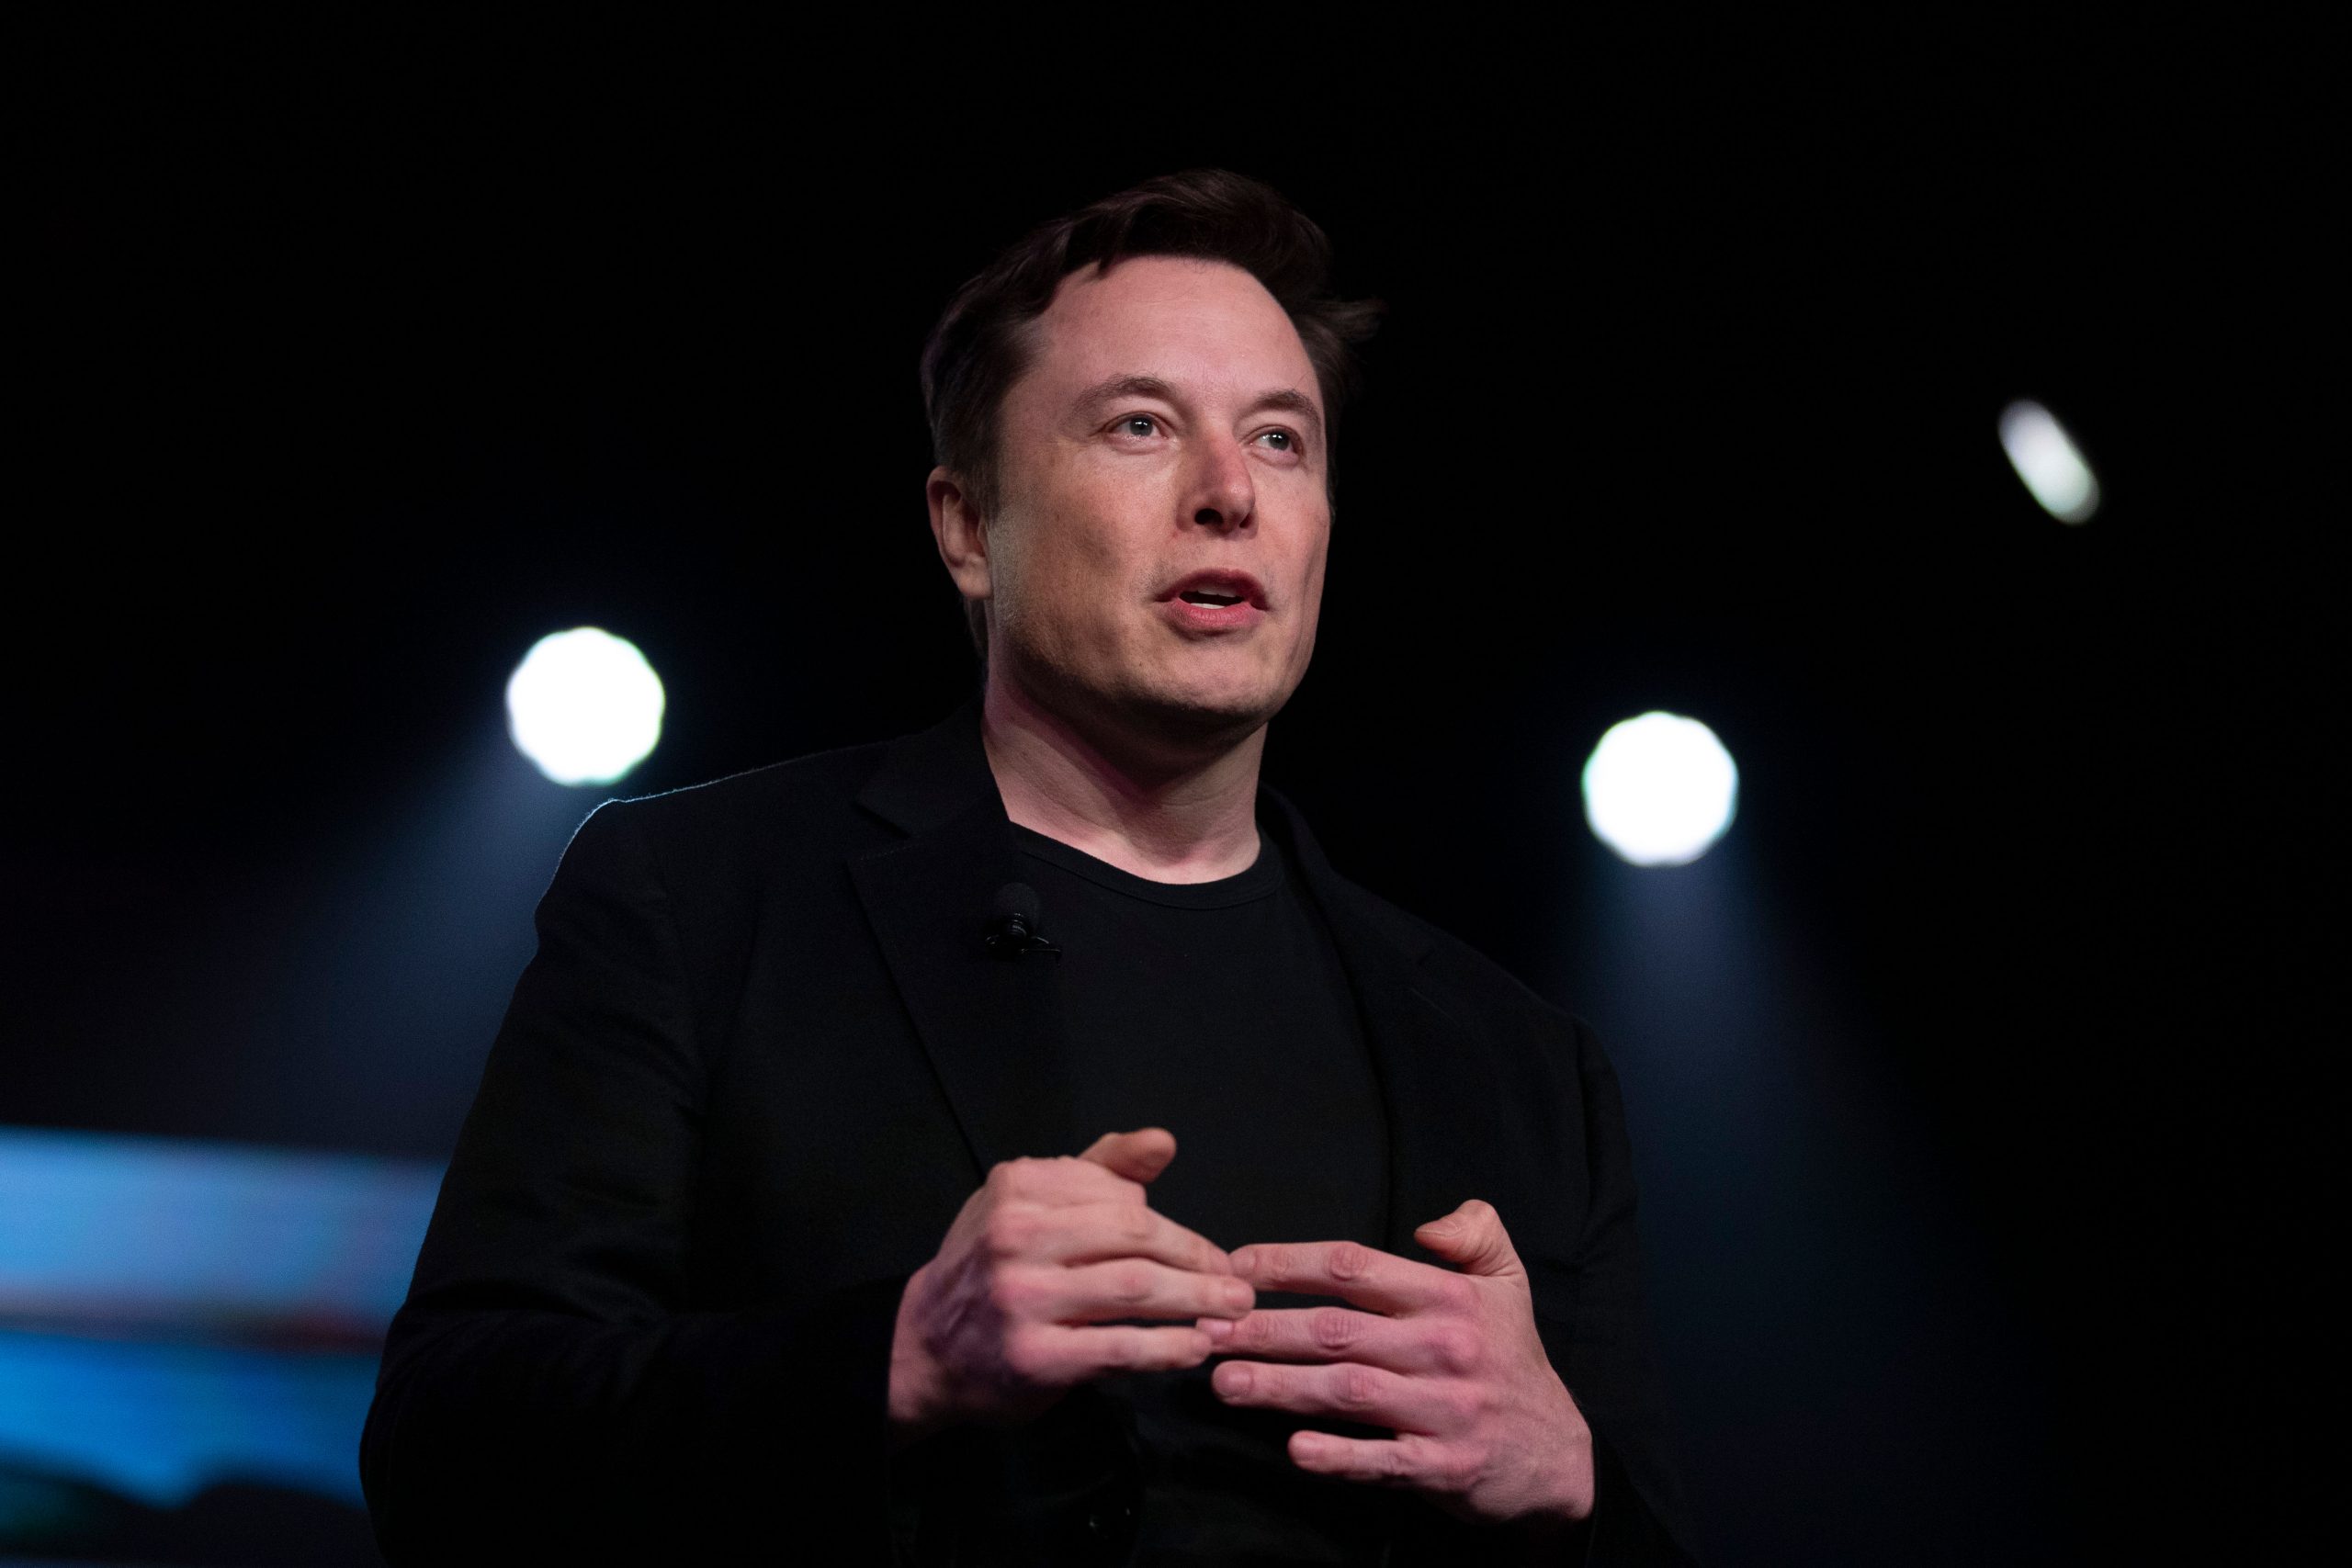 Elon Musk blames so-called ‘left’ for sexual harassment report